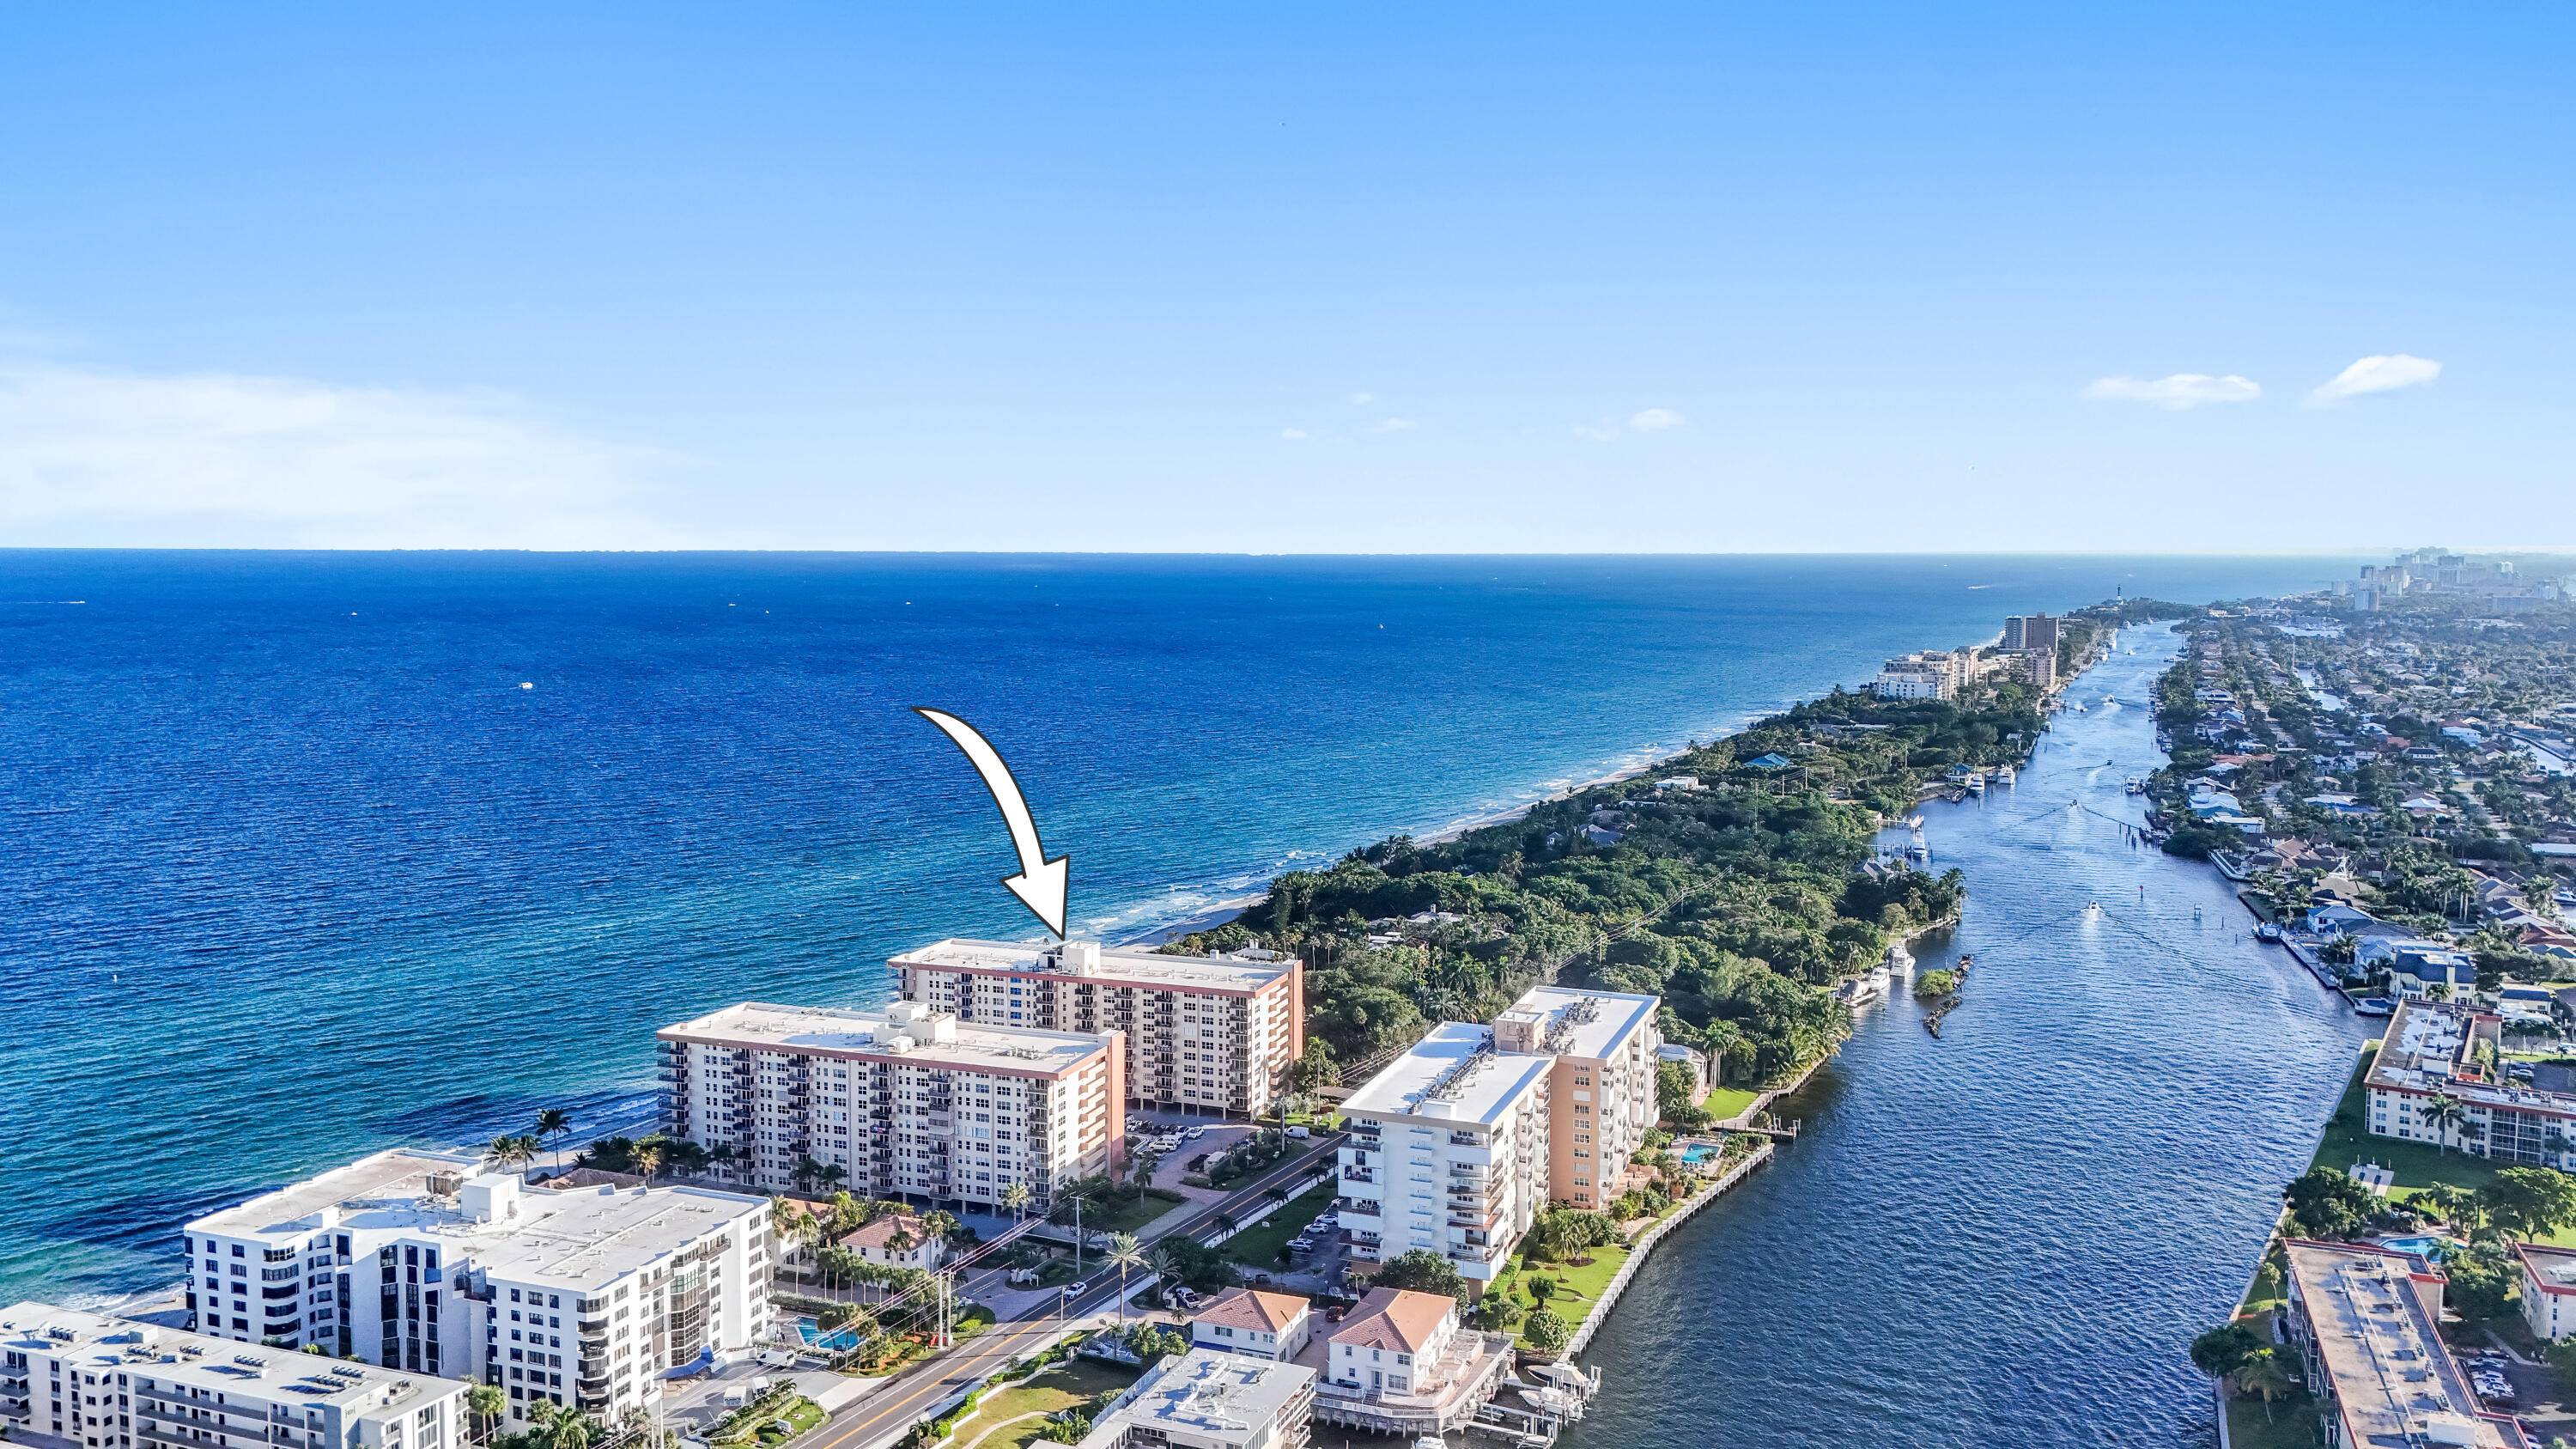 Opportunity to experience the South Florida Lifestyle Resort in this great community Opal Towers, located in the prestigious Millionaire Mile, surrounded by magnificent Multi Million dollar developments and Luxurious homes.